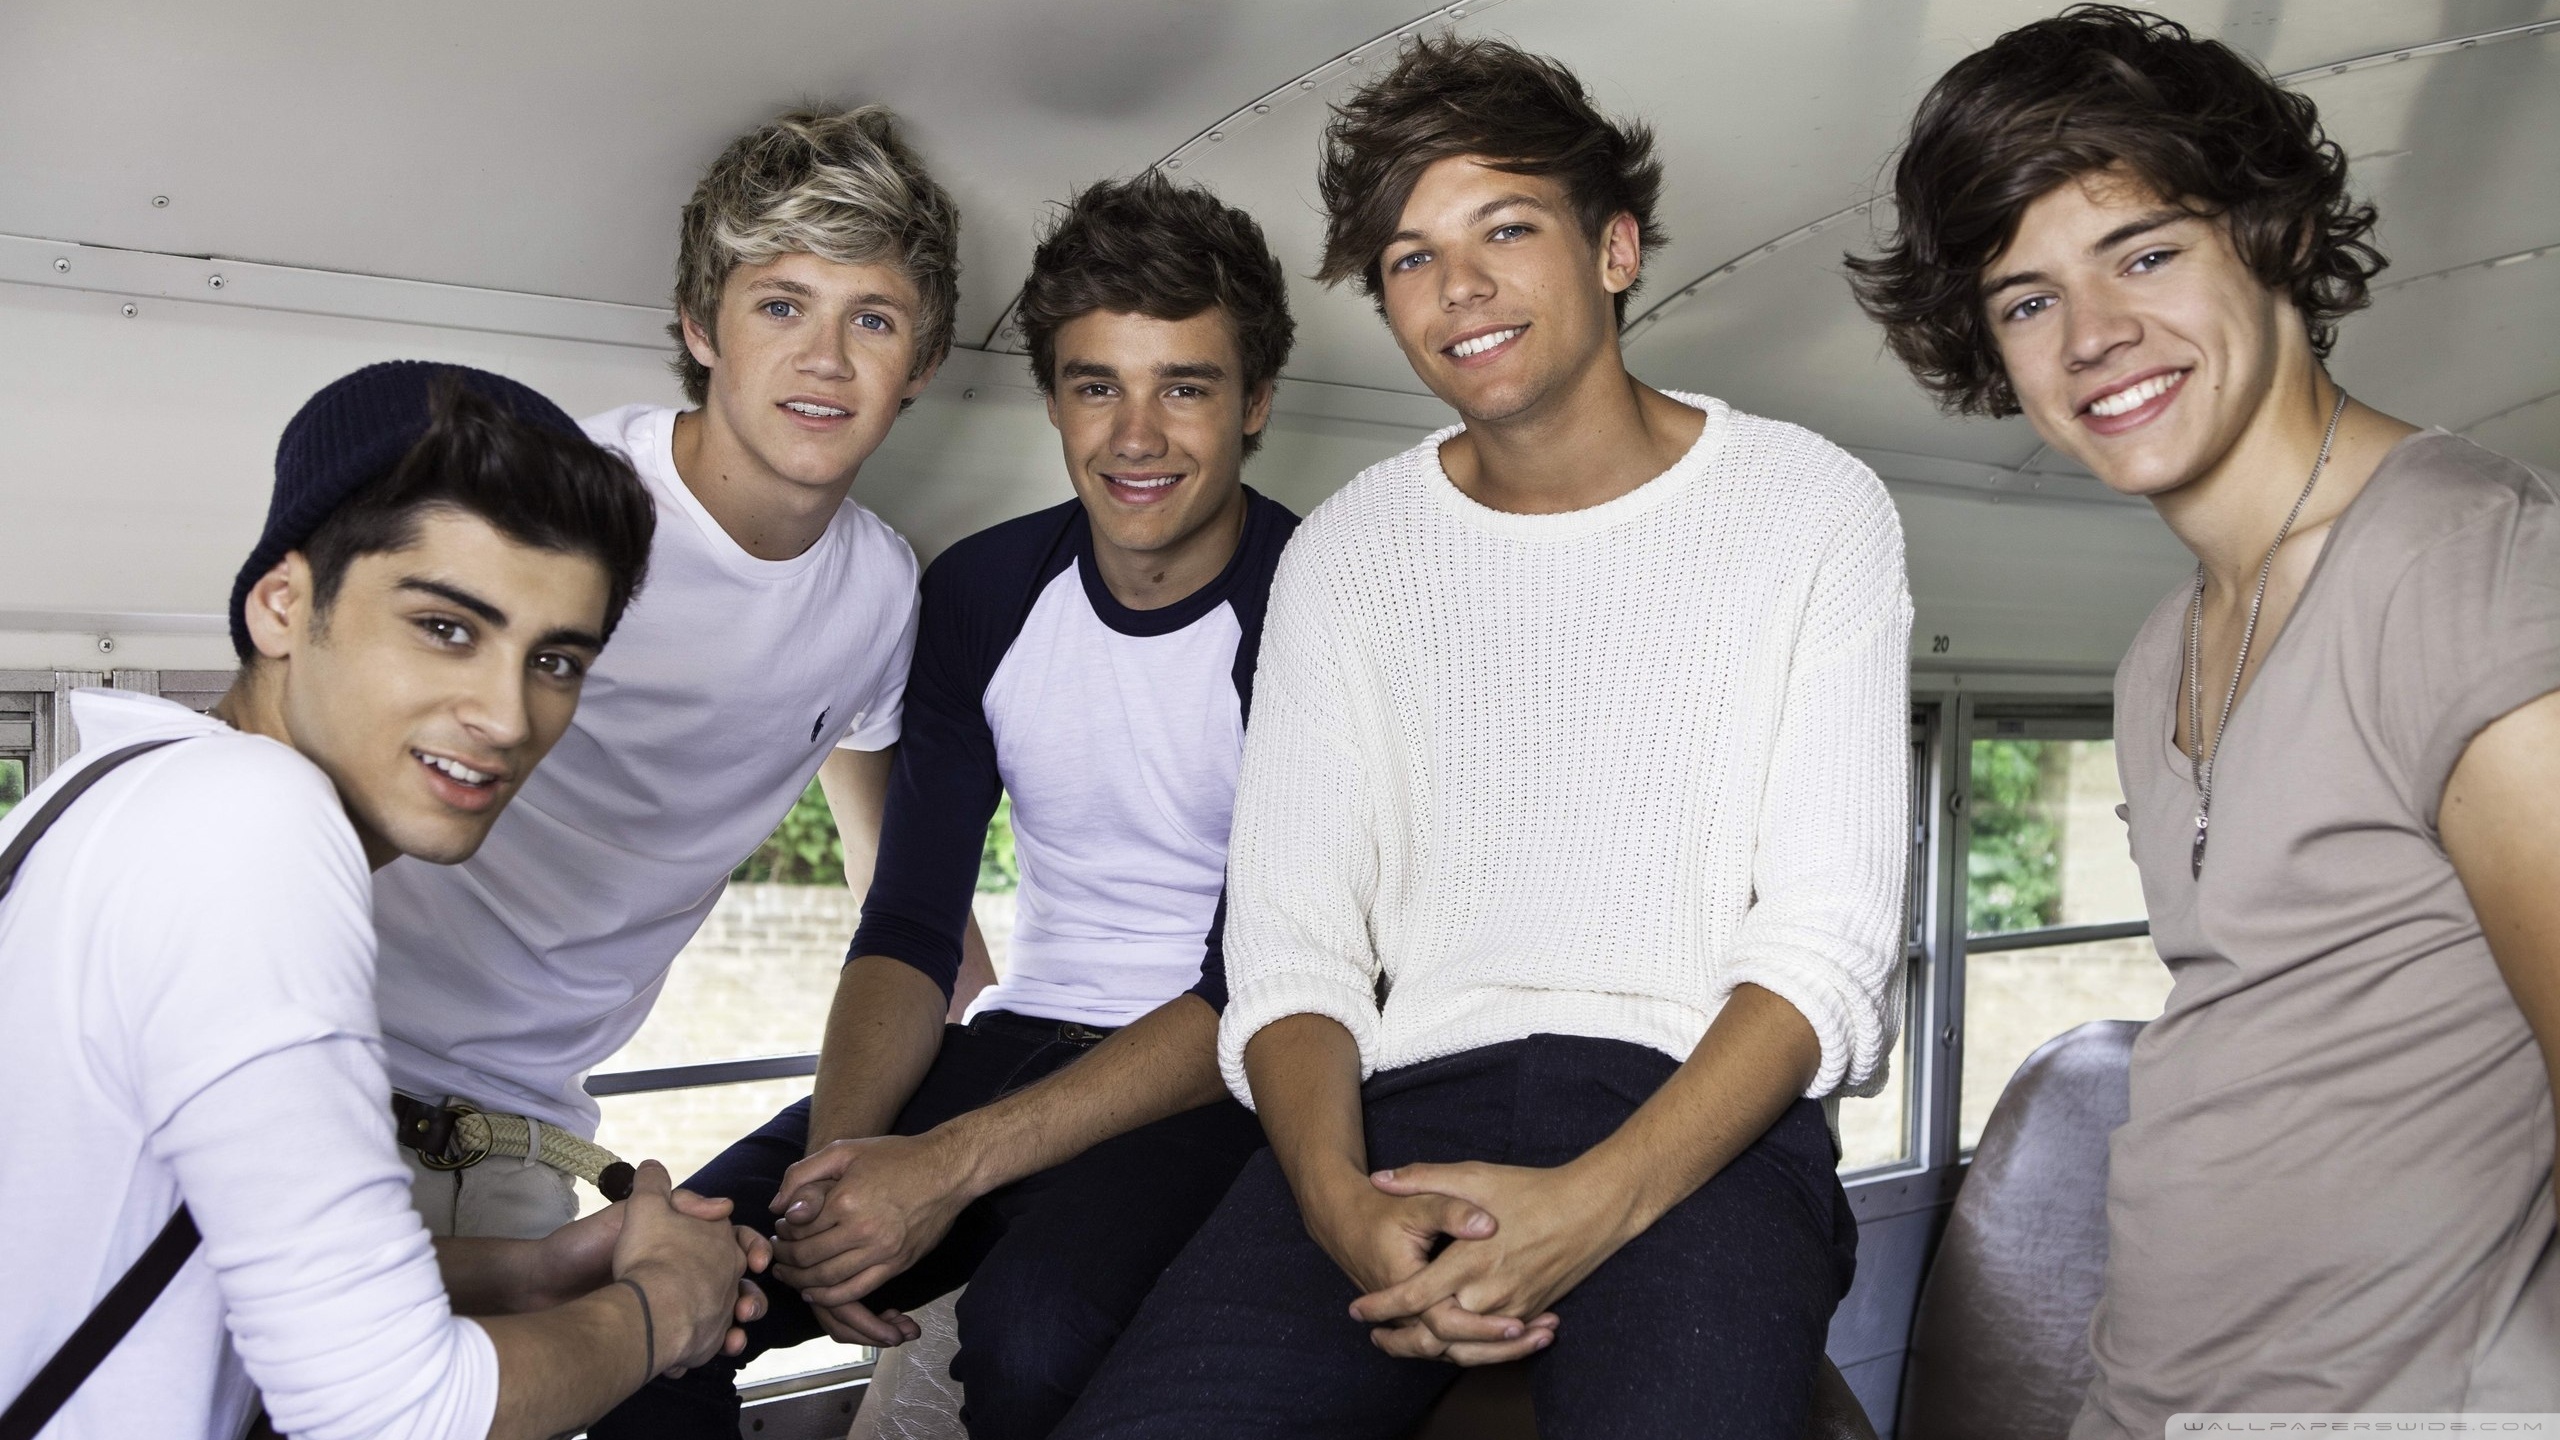 One Direction Computer Wallpapers